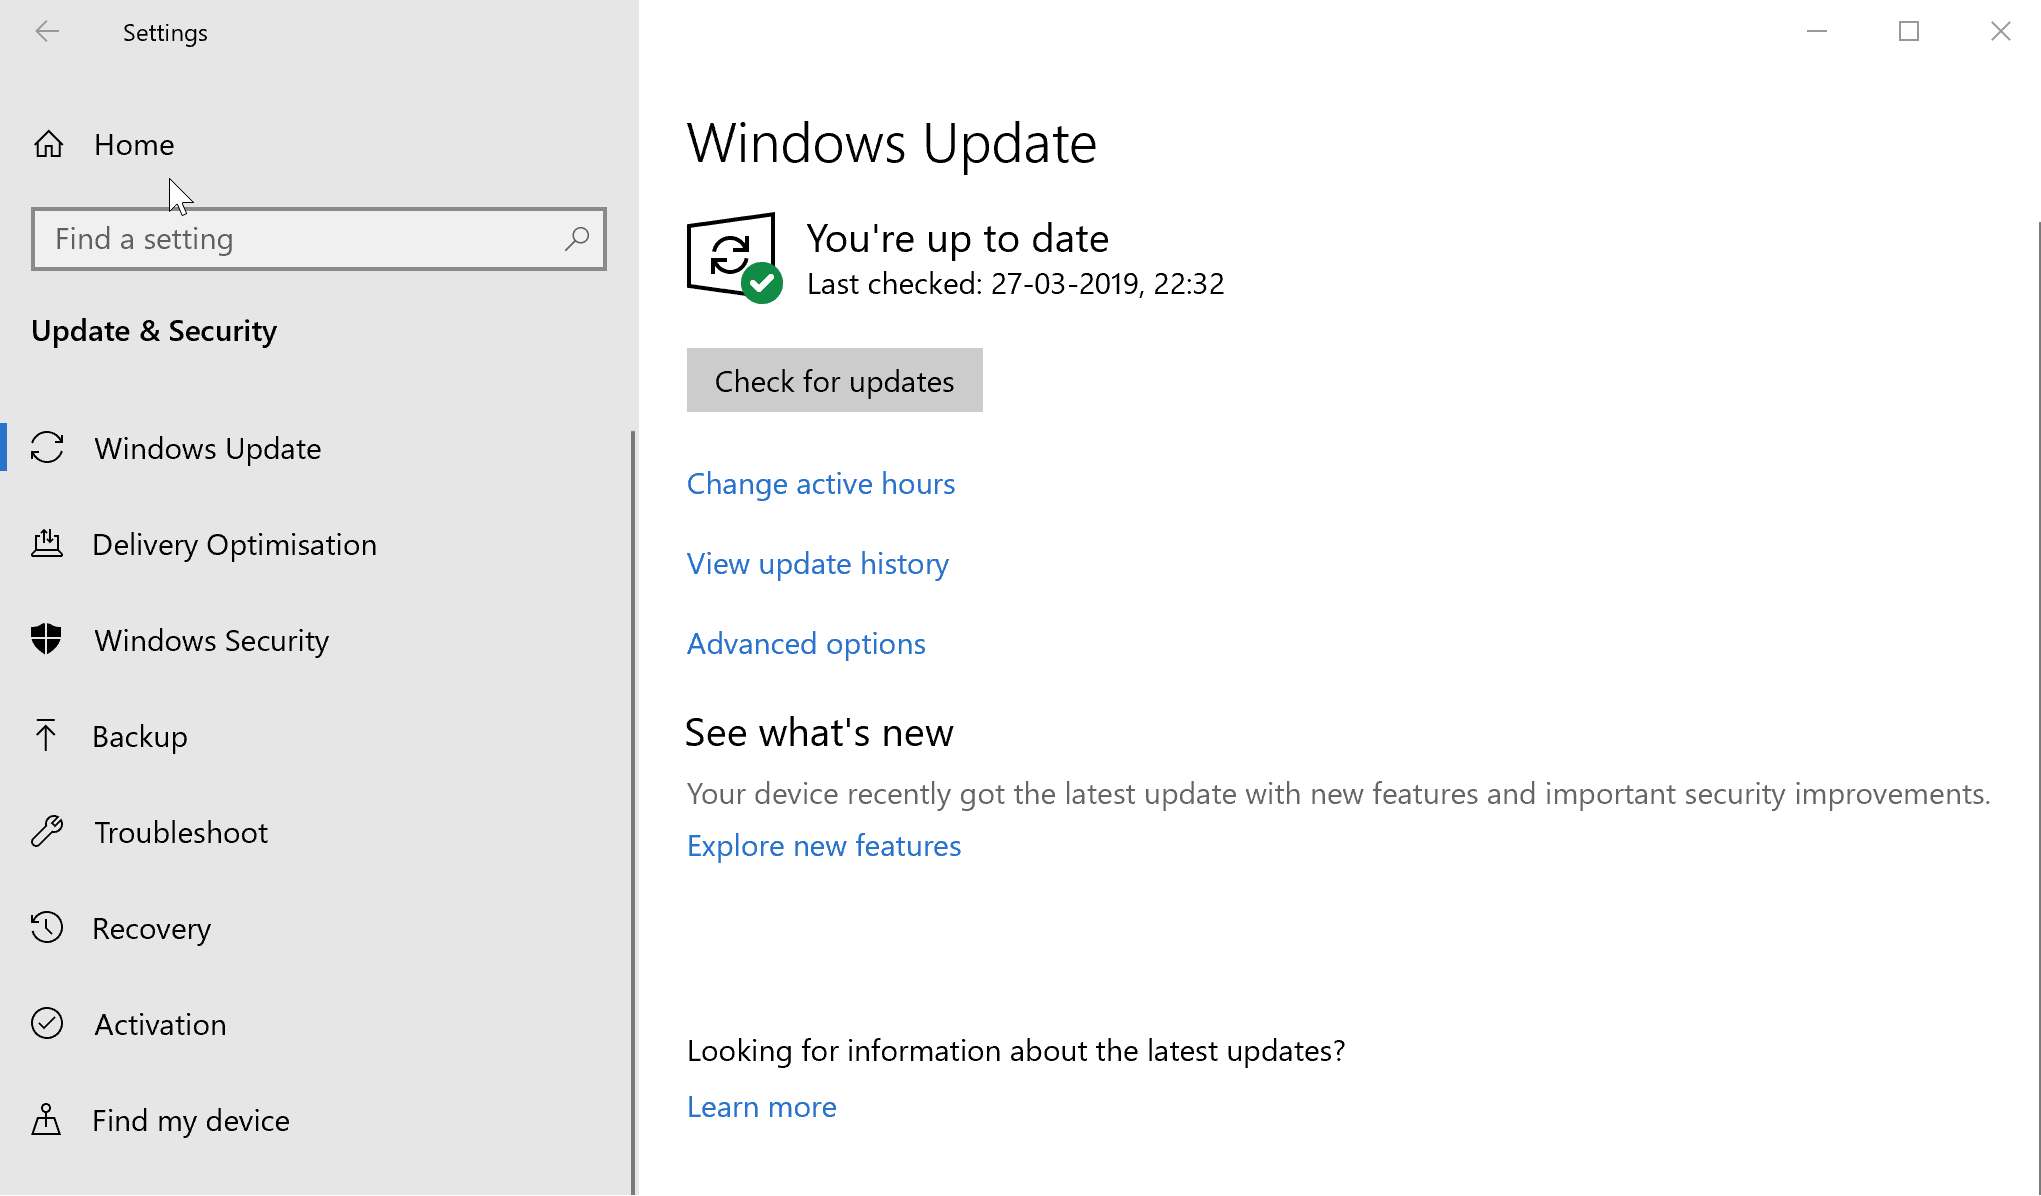 Windows Update Windows was unable to install base system device